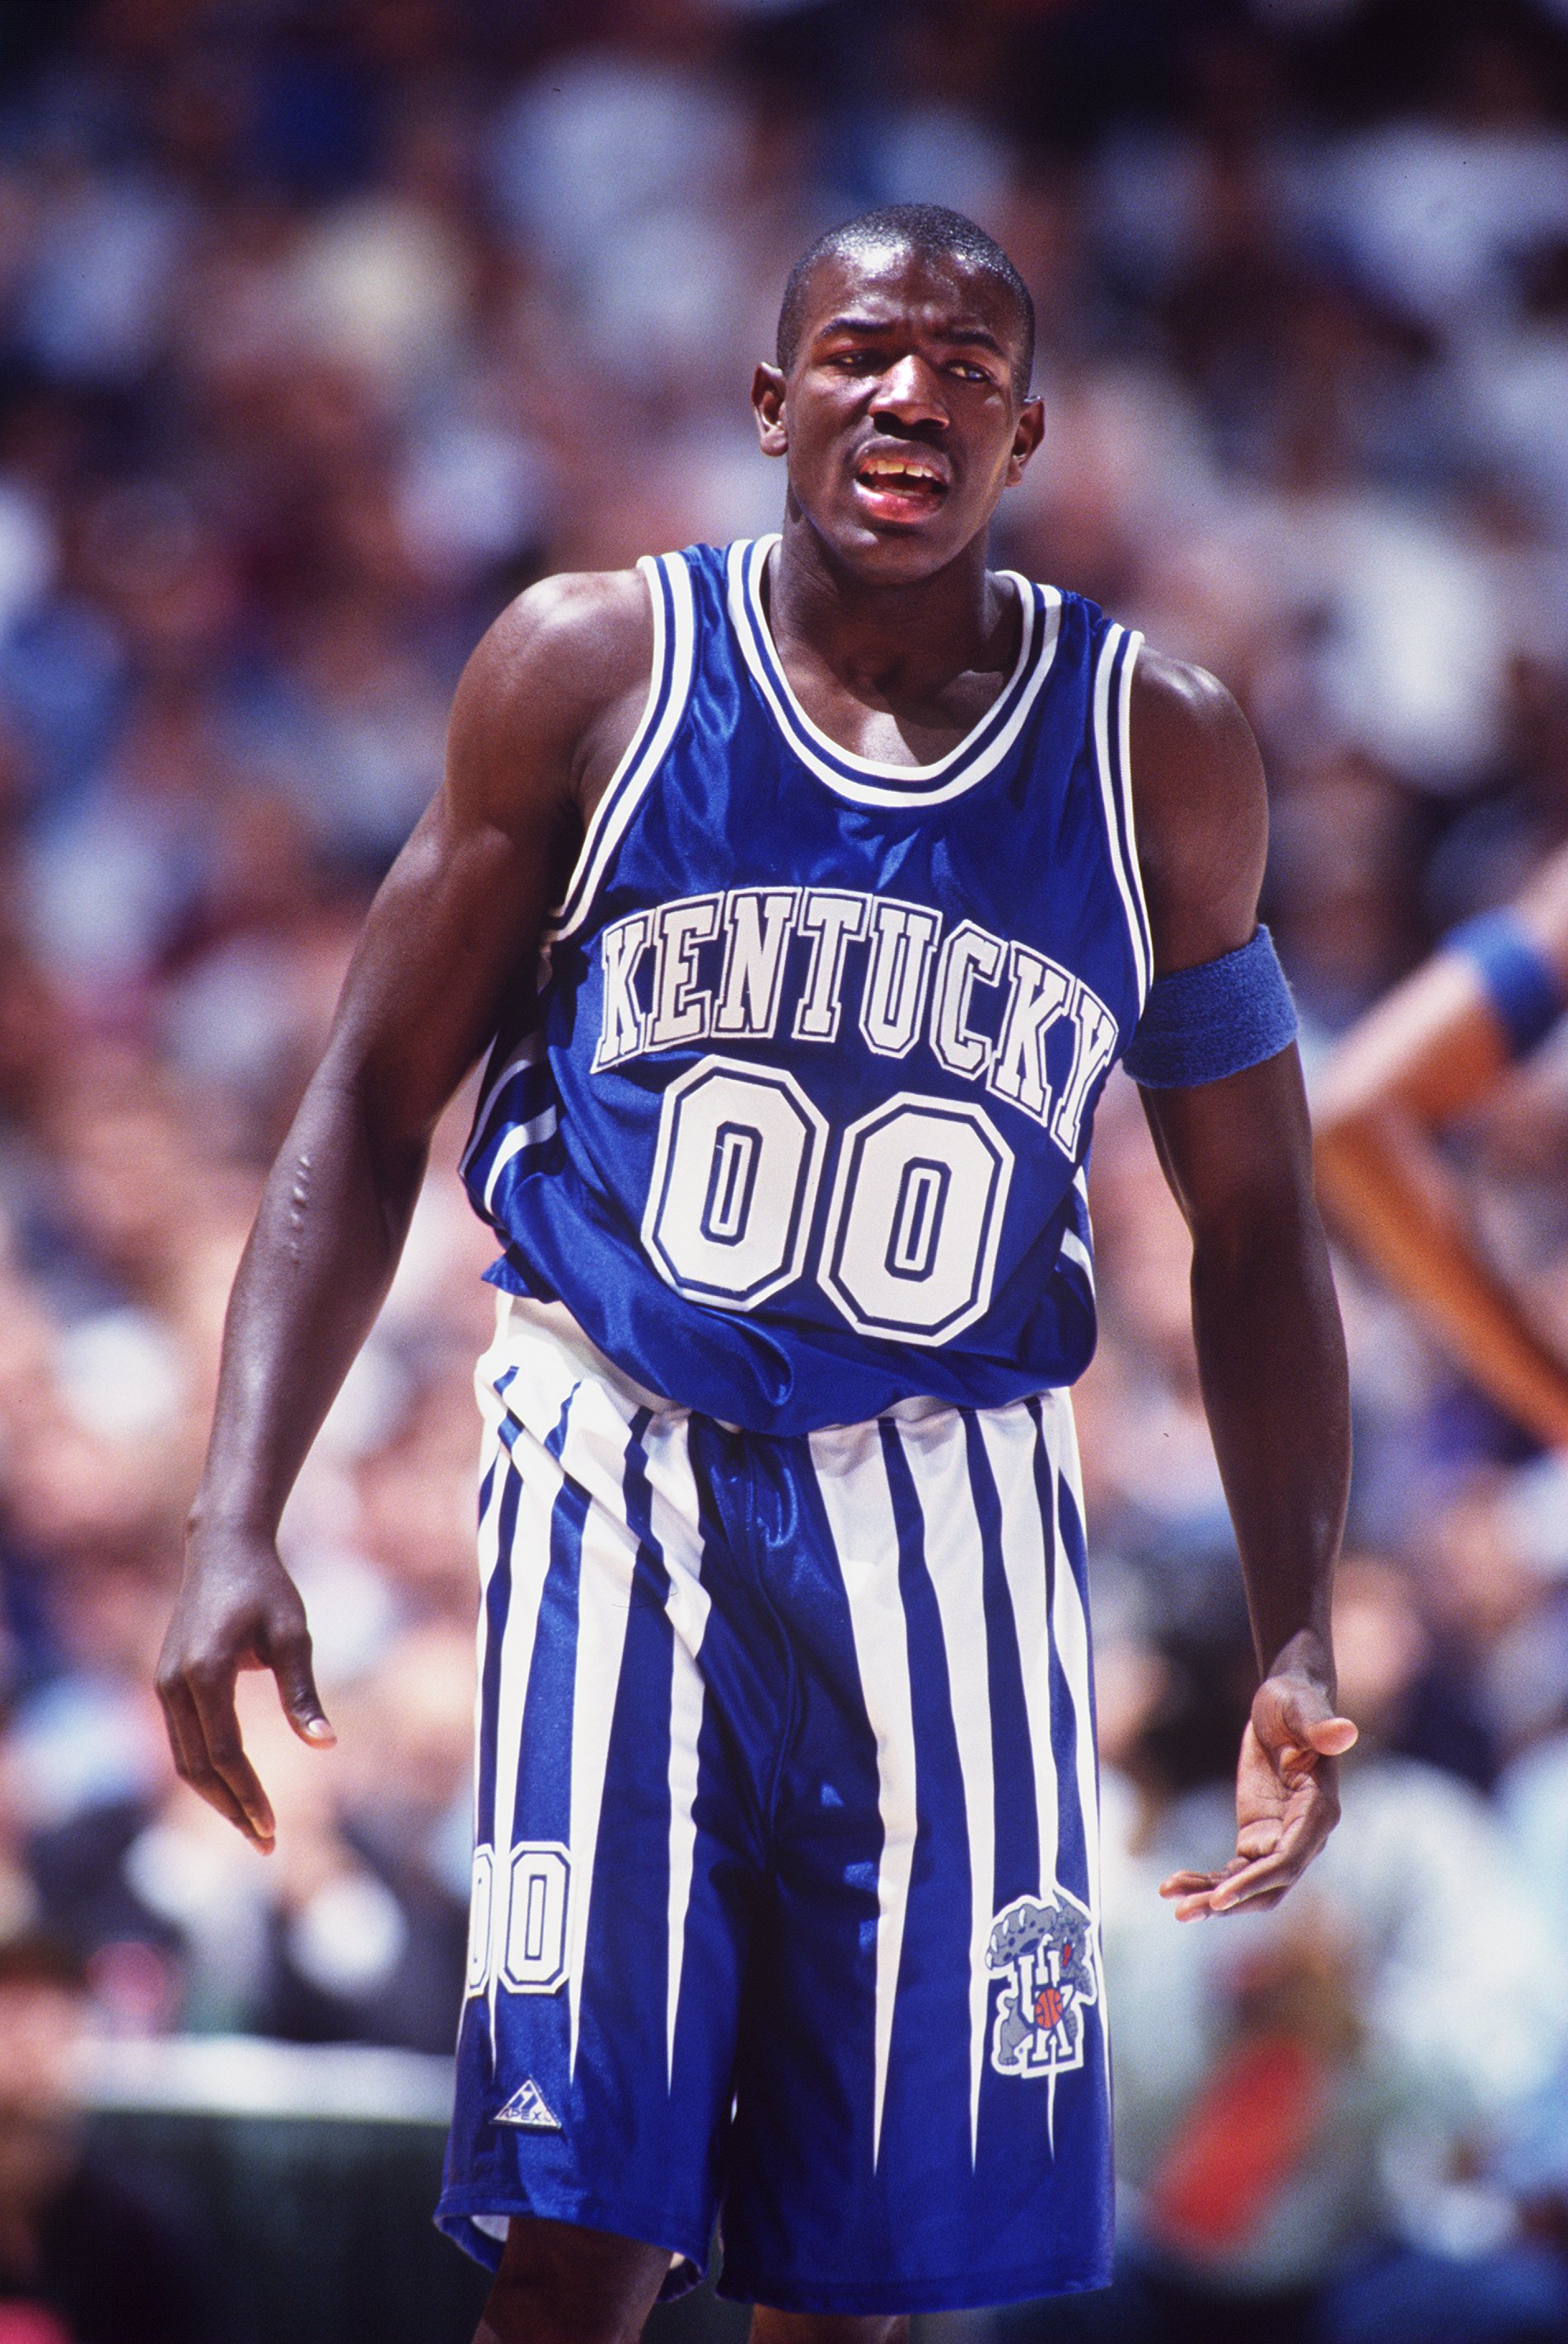 3 Dec 1994: KENTUCKY GUARD TONY DELK DURING THE WILDCATS 82-81 LOSS TO THE UCLA BRUINS IN THE JOHN WOODEN CLASSIC AT THE ANAHEIM POND IN ANAHEIM, CALIFORNIA.